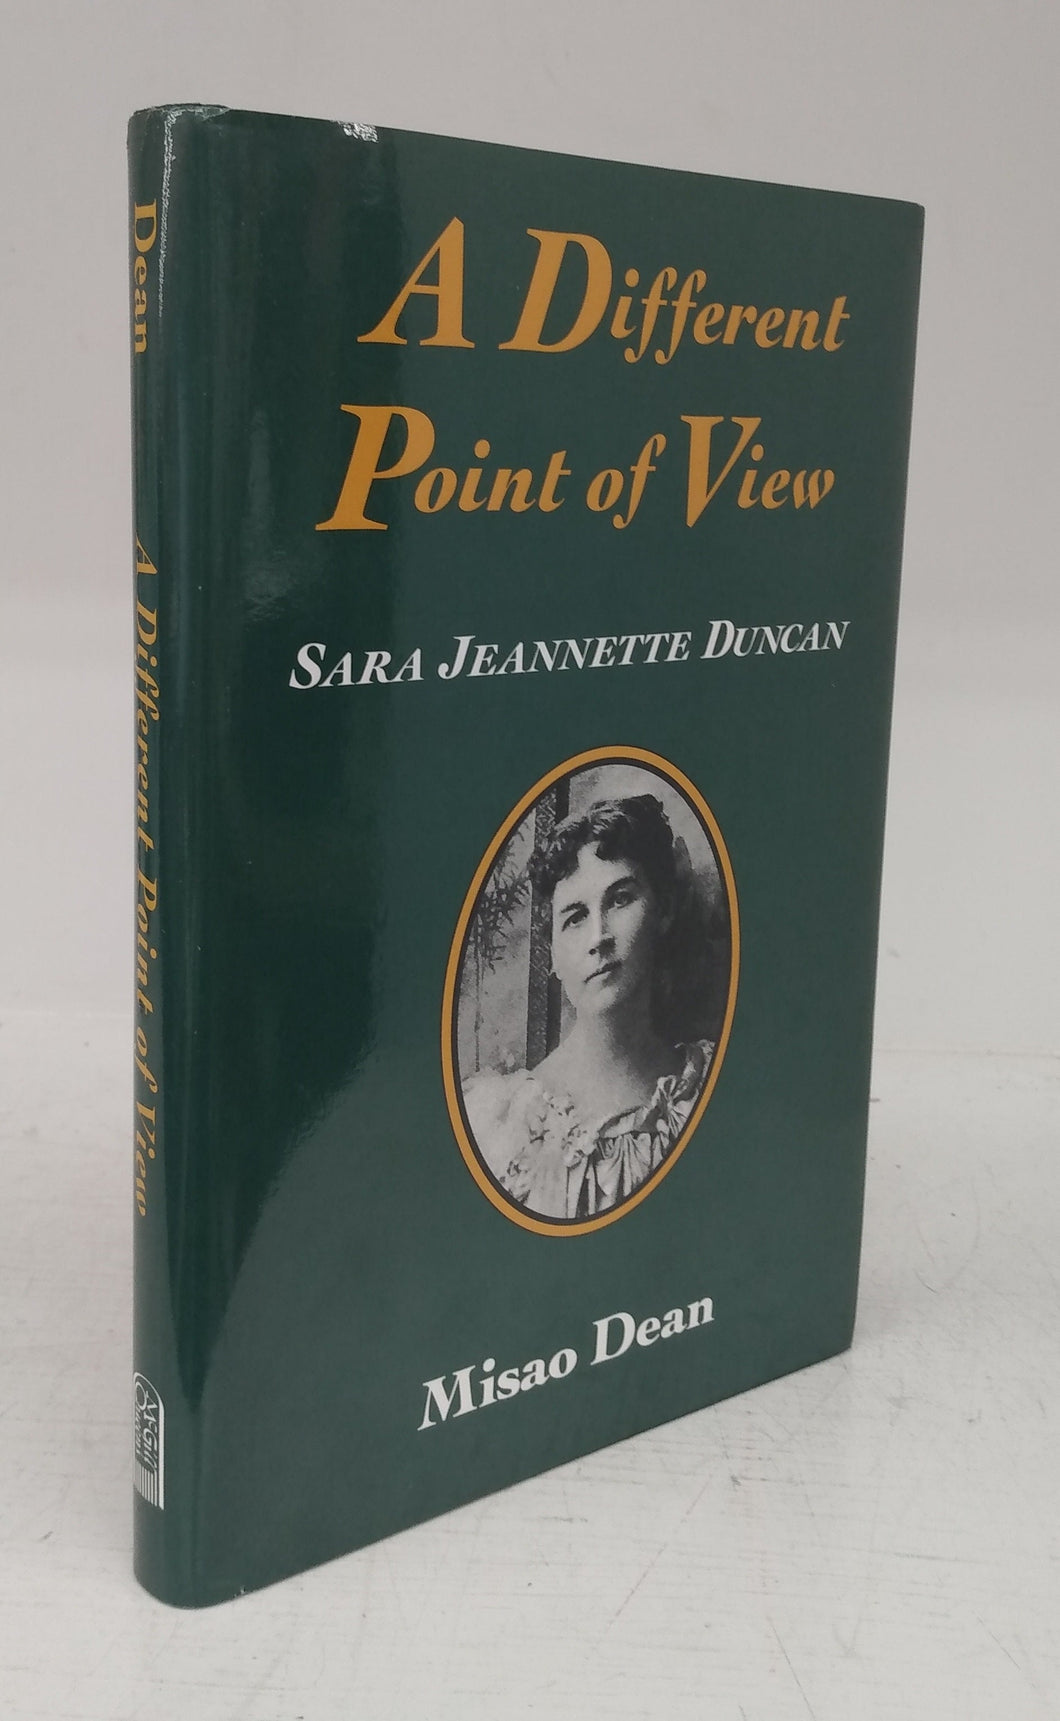 A Different Point of View: Sara Jeannette Duncan